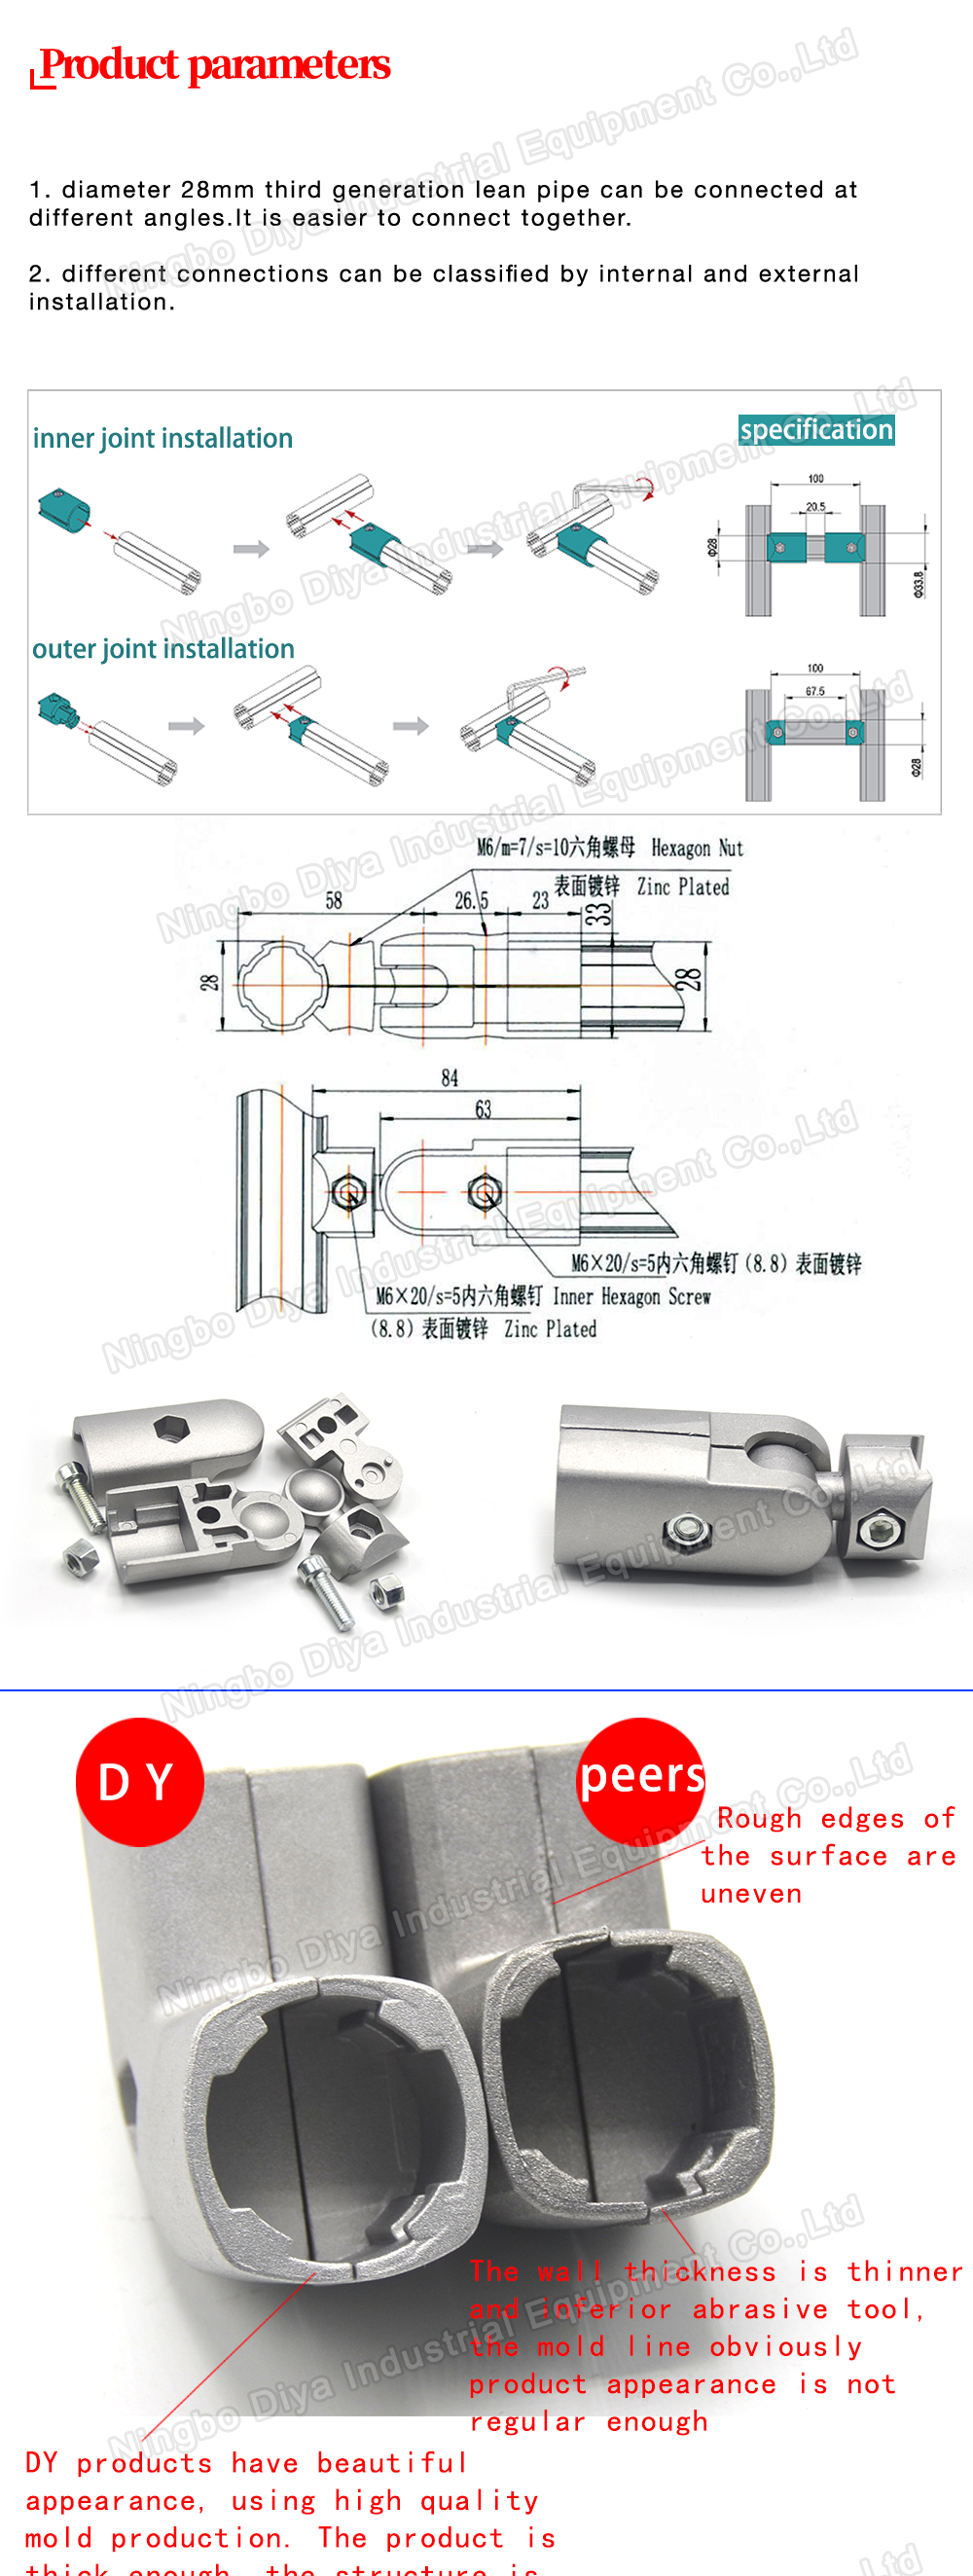 180 Degree Free Connector Outer Type For OD 28mm Thickness 1.7mm Aluminum Tube/ Aluminium Alloy Lean Pipe Joint